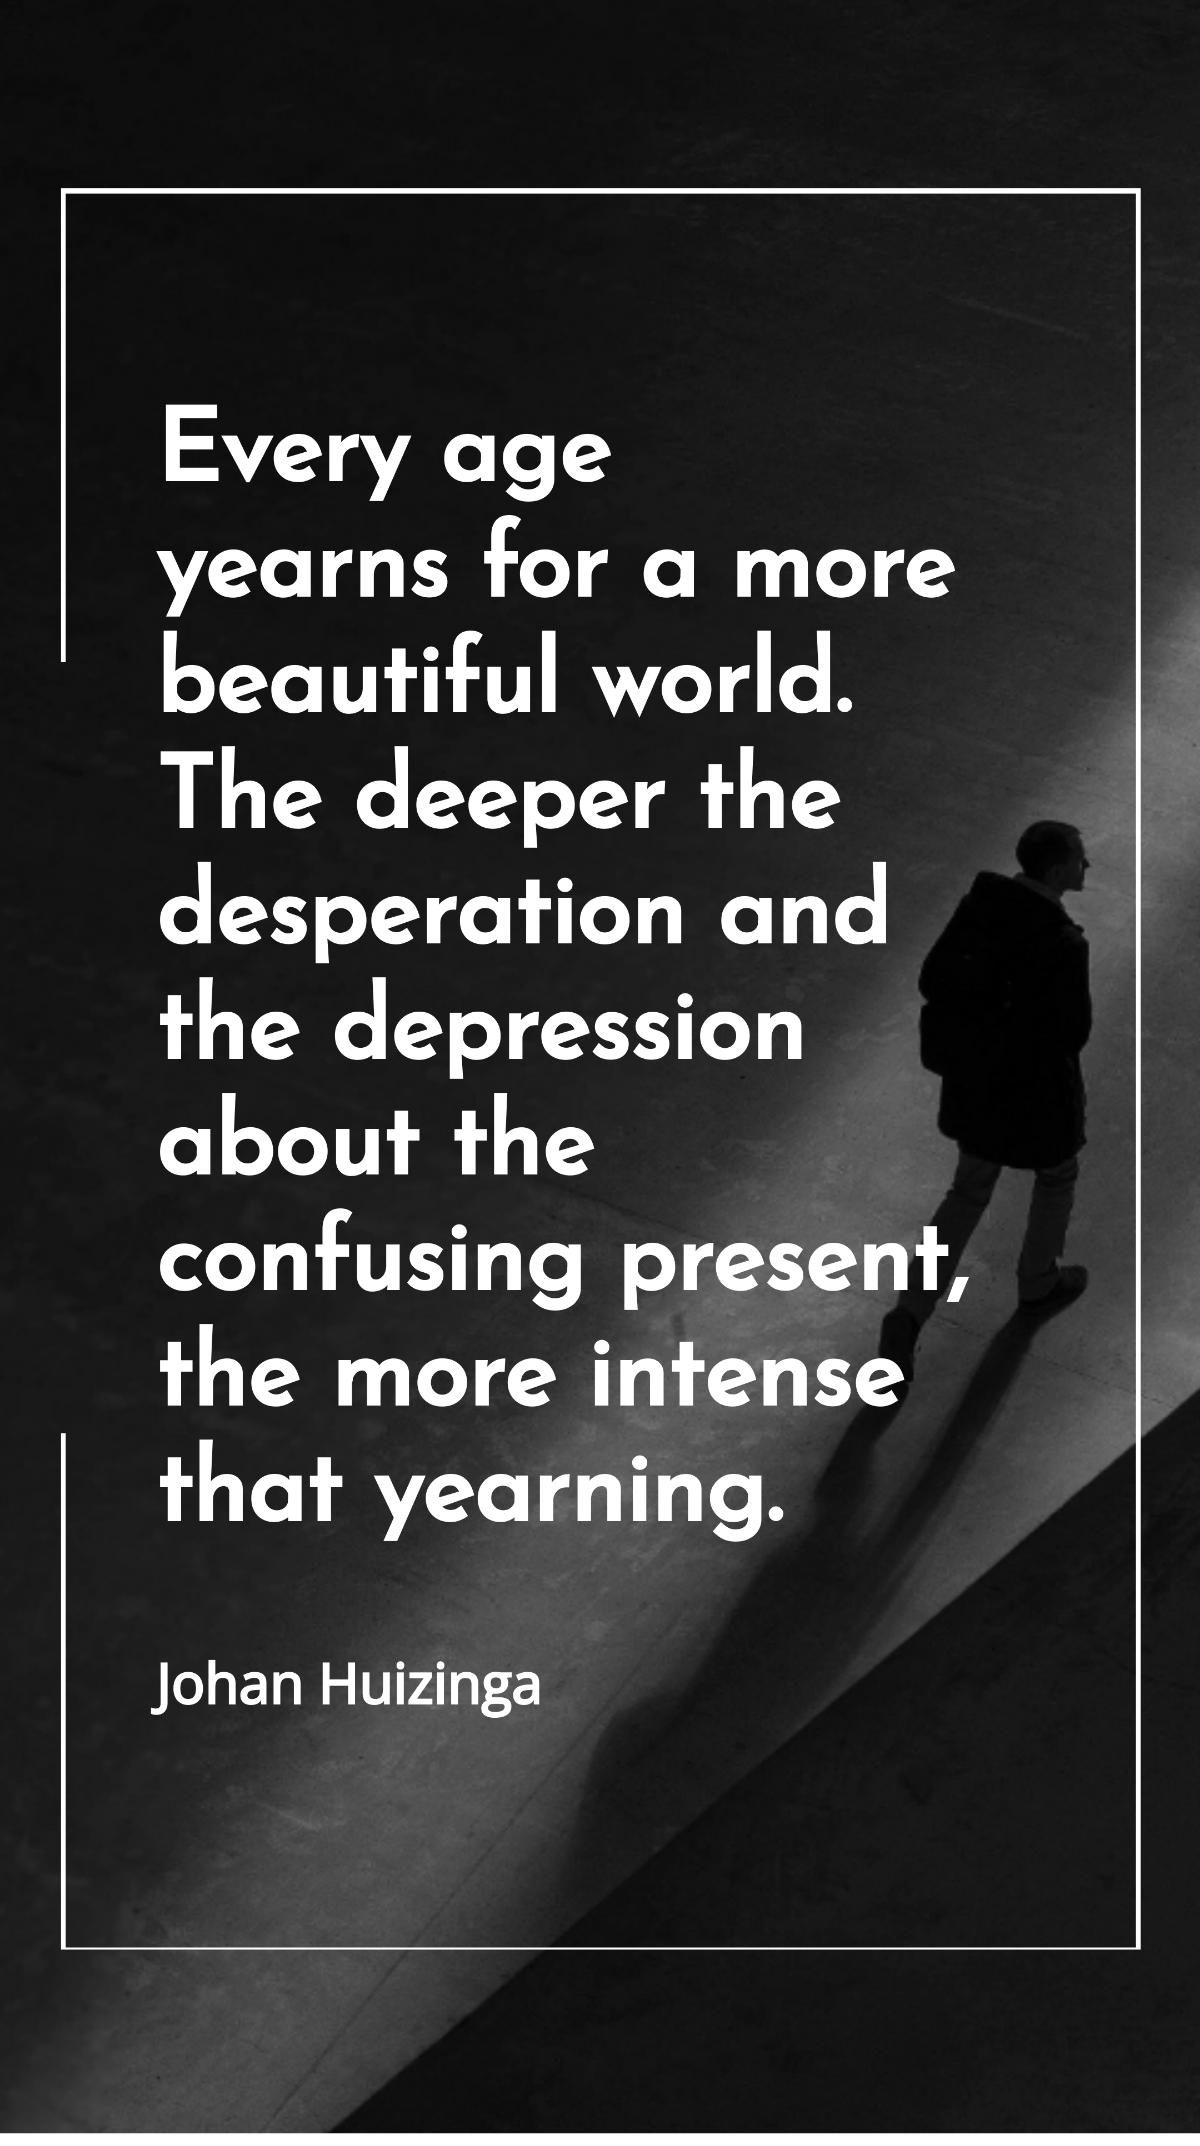 Johan Huizinga - Every age yearns for a more beautiful world. The deeper the desperation and the depression about the confusing present, the more intense that yearning. Template